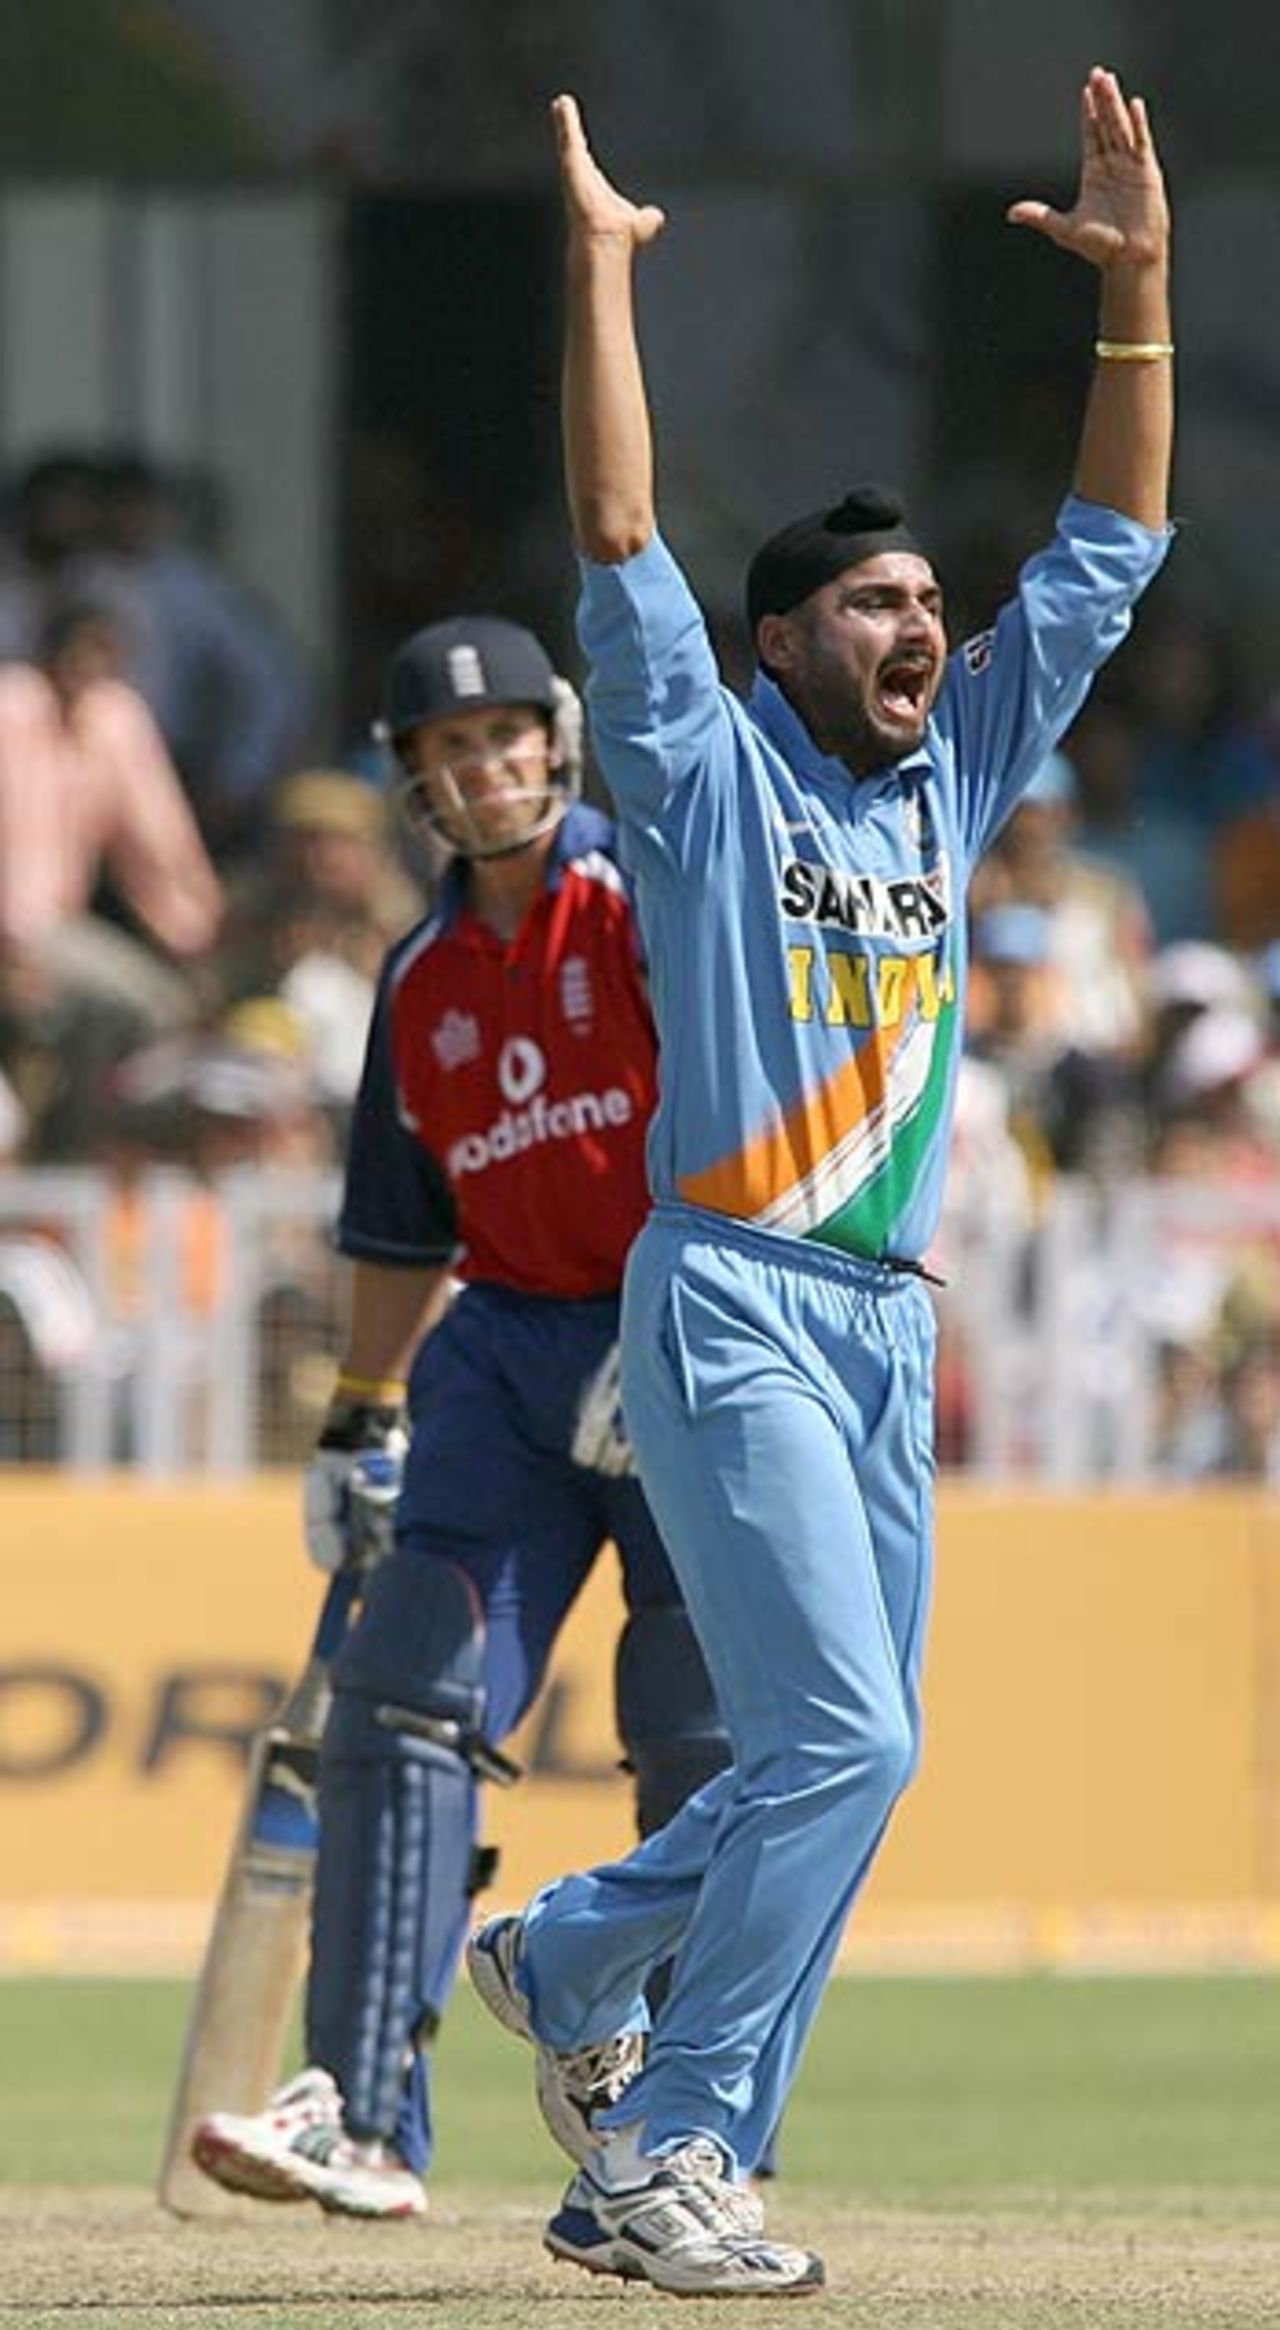 Harbhajan Singh successfully appeals for an lbw appeal against Matt Prior, India v England, 2nd ODI, Faridabad, March 31, 2006